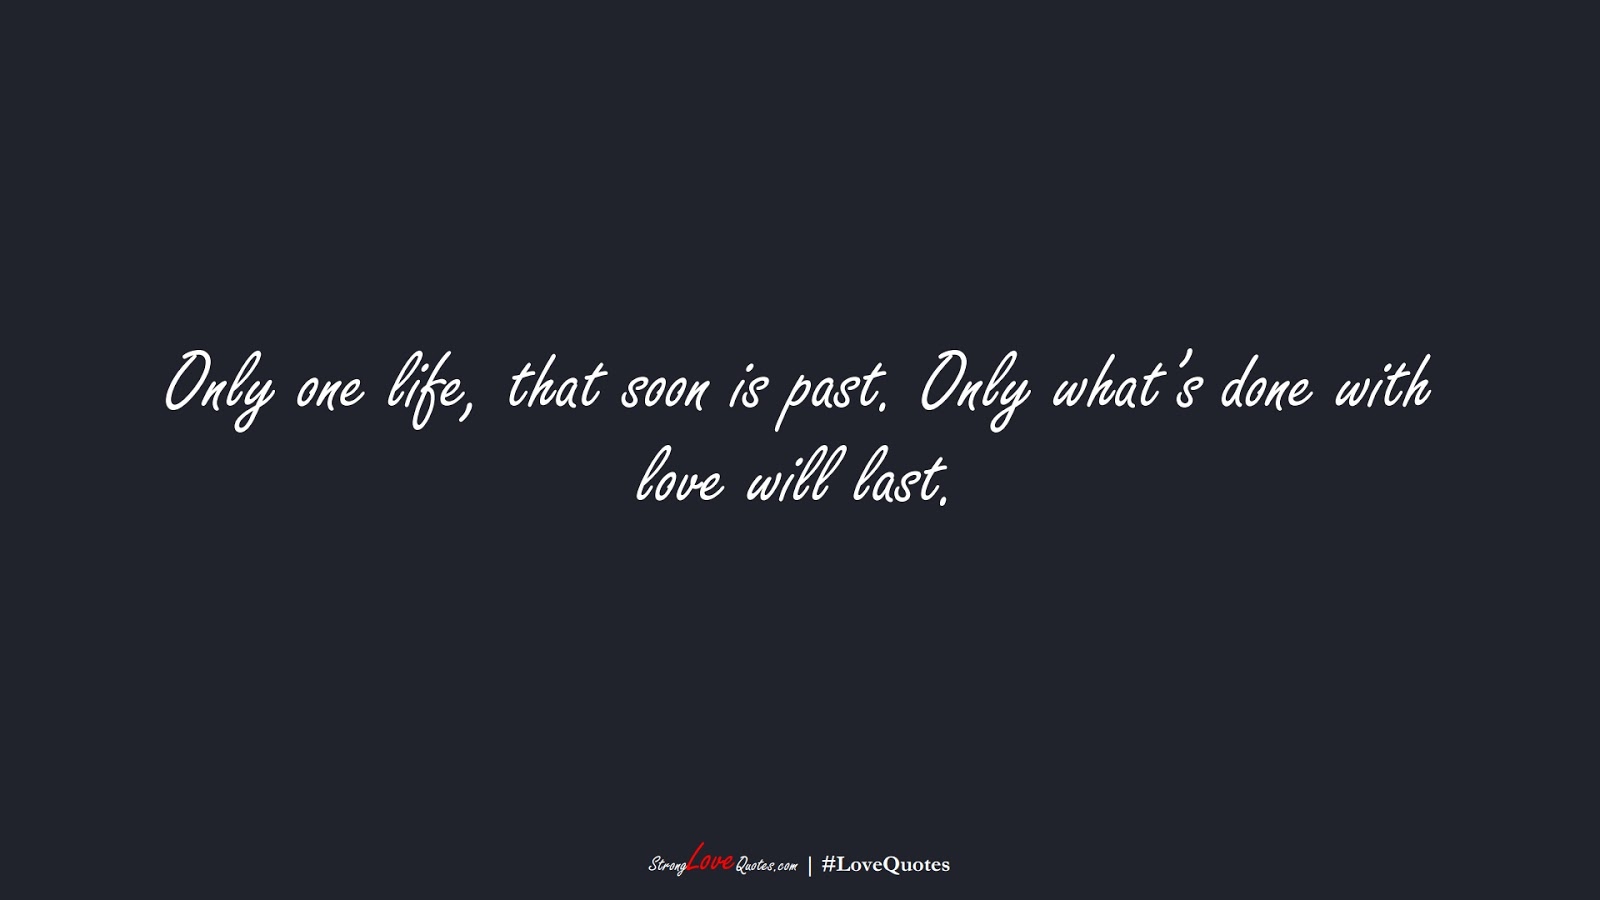 Only one life, that soon is past. Only what’s done with love will last.FALSE